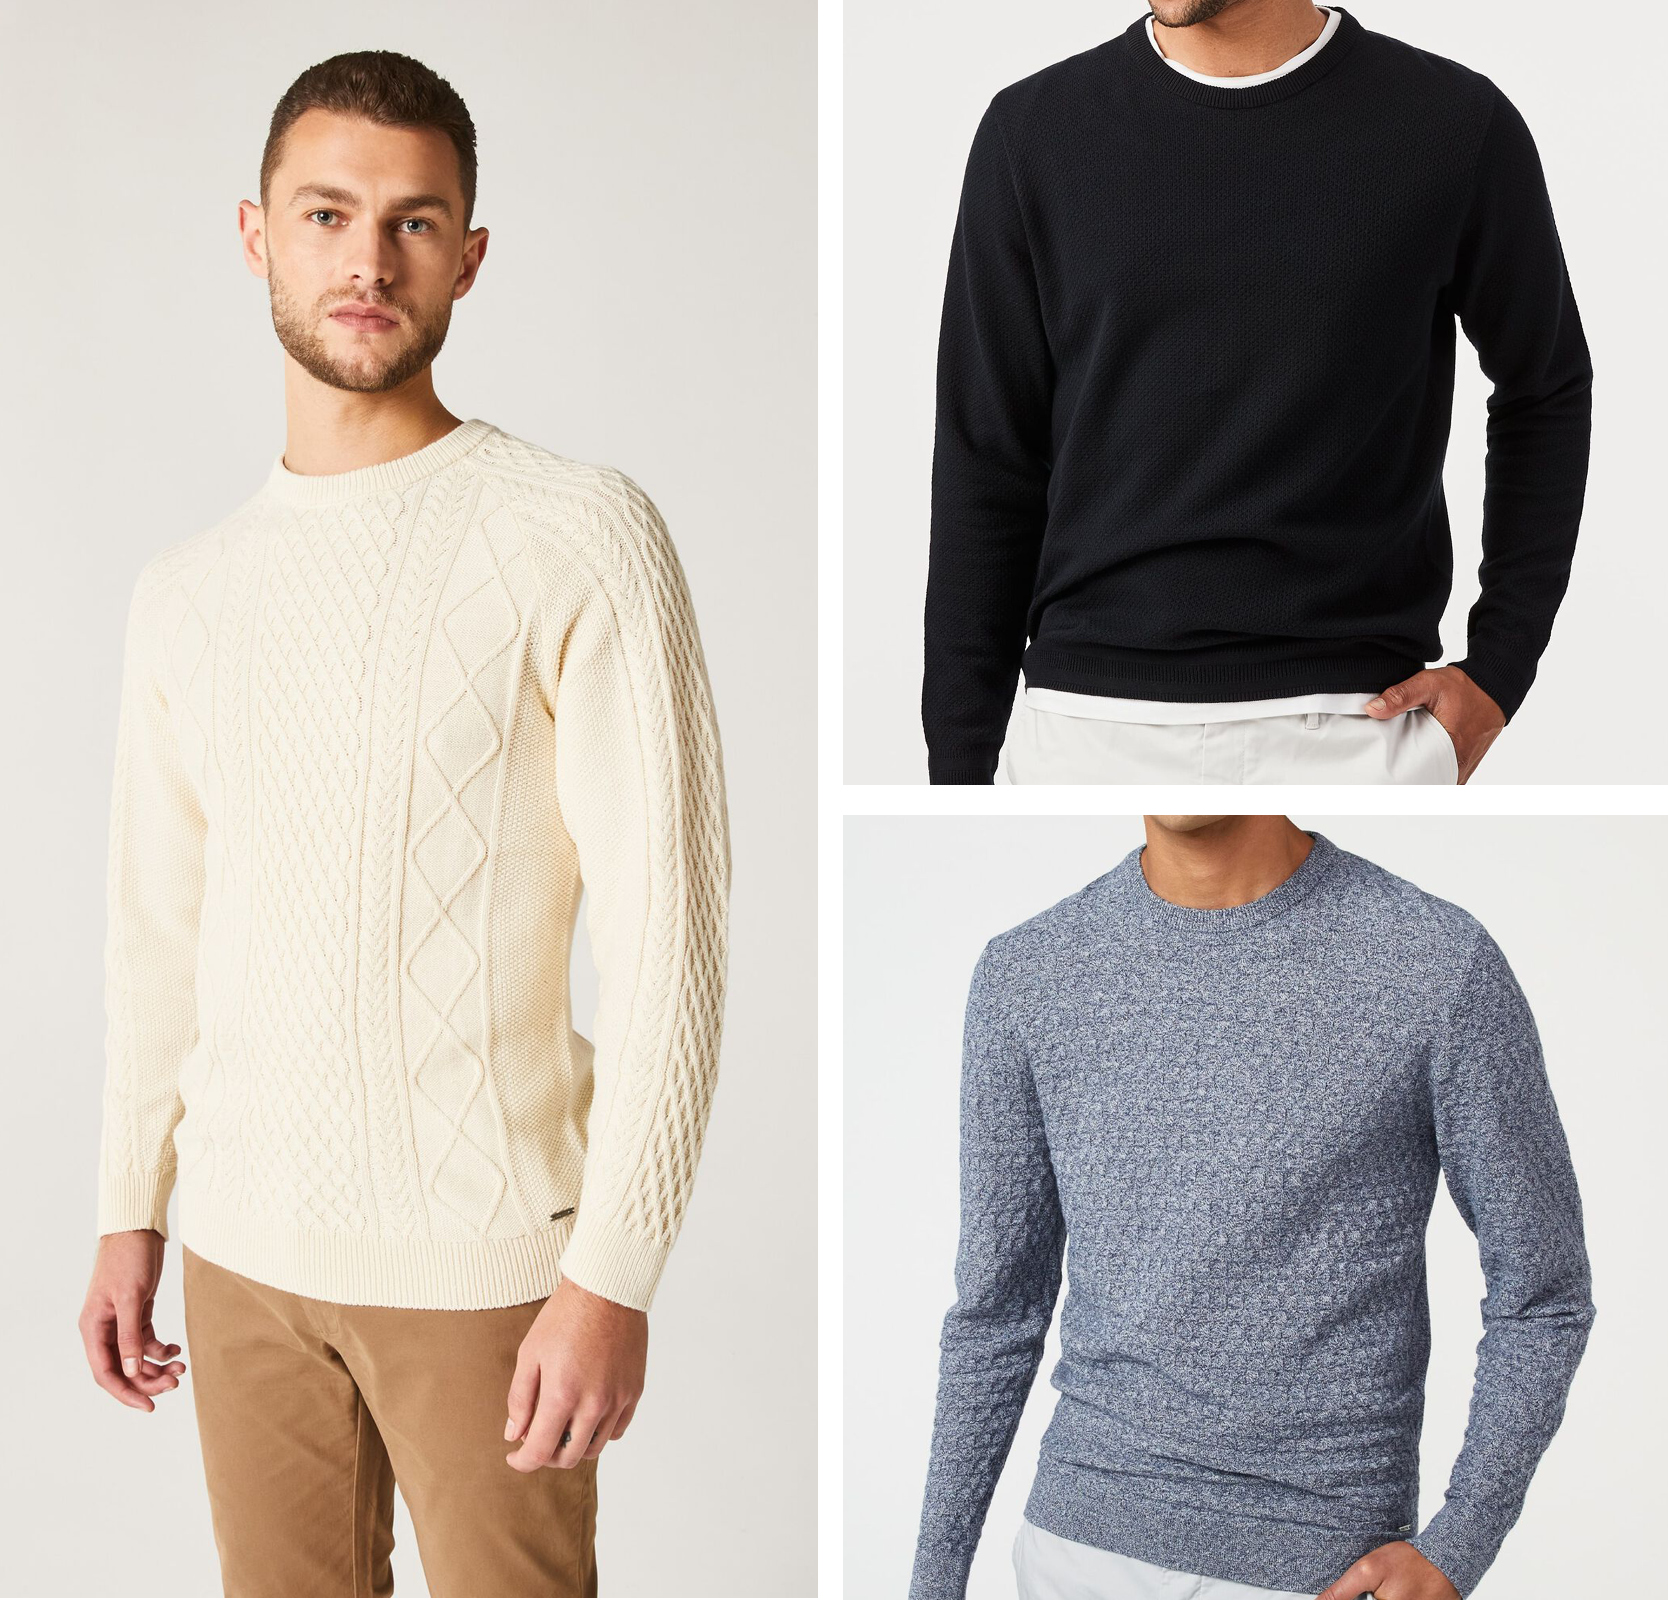 Collage of model wearing different types of casual POLITIX knitwear